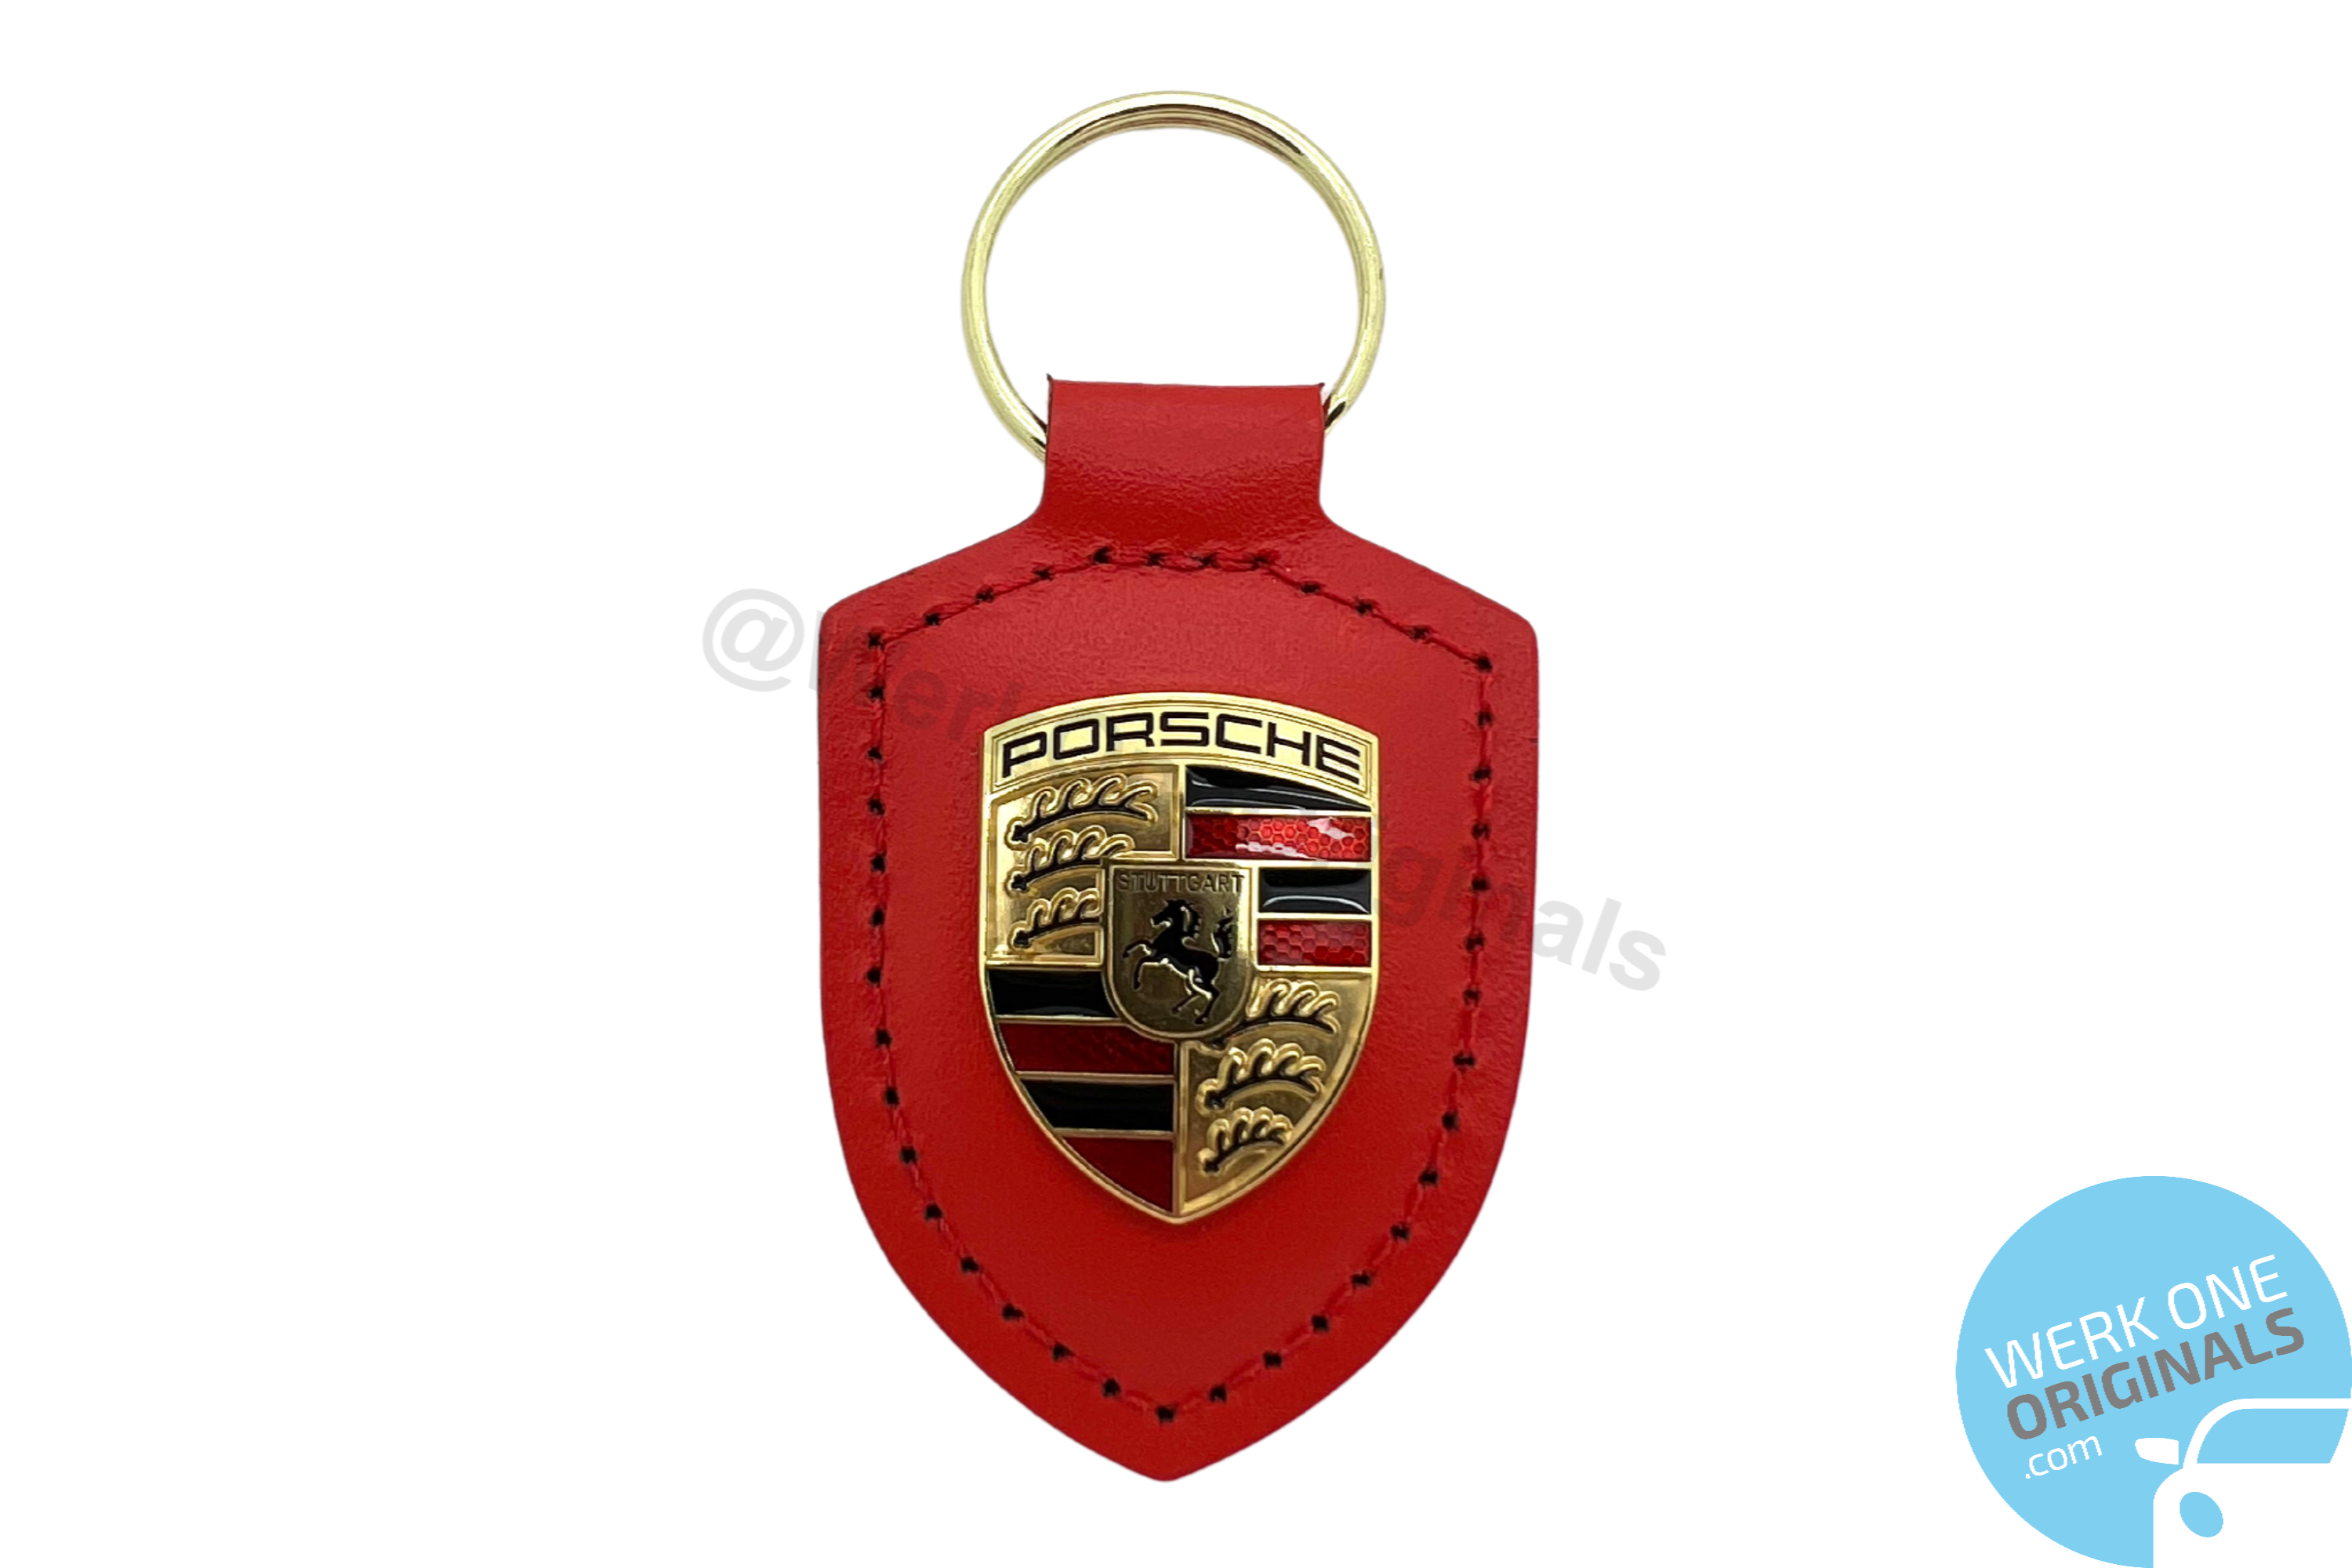 Porsche Official 75 Years Anniversary Limited Edition Key Fob in Lava Orange